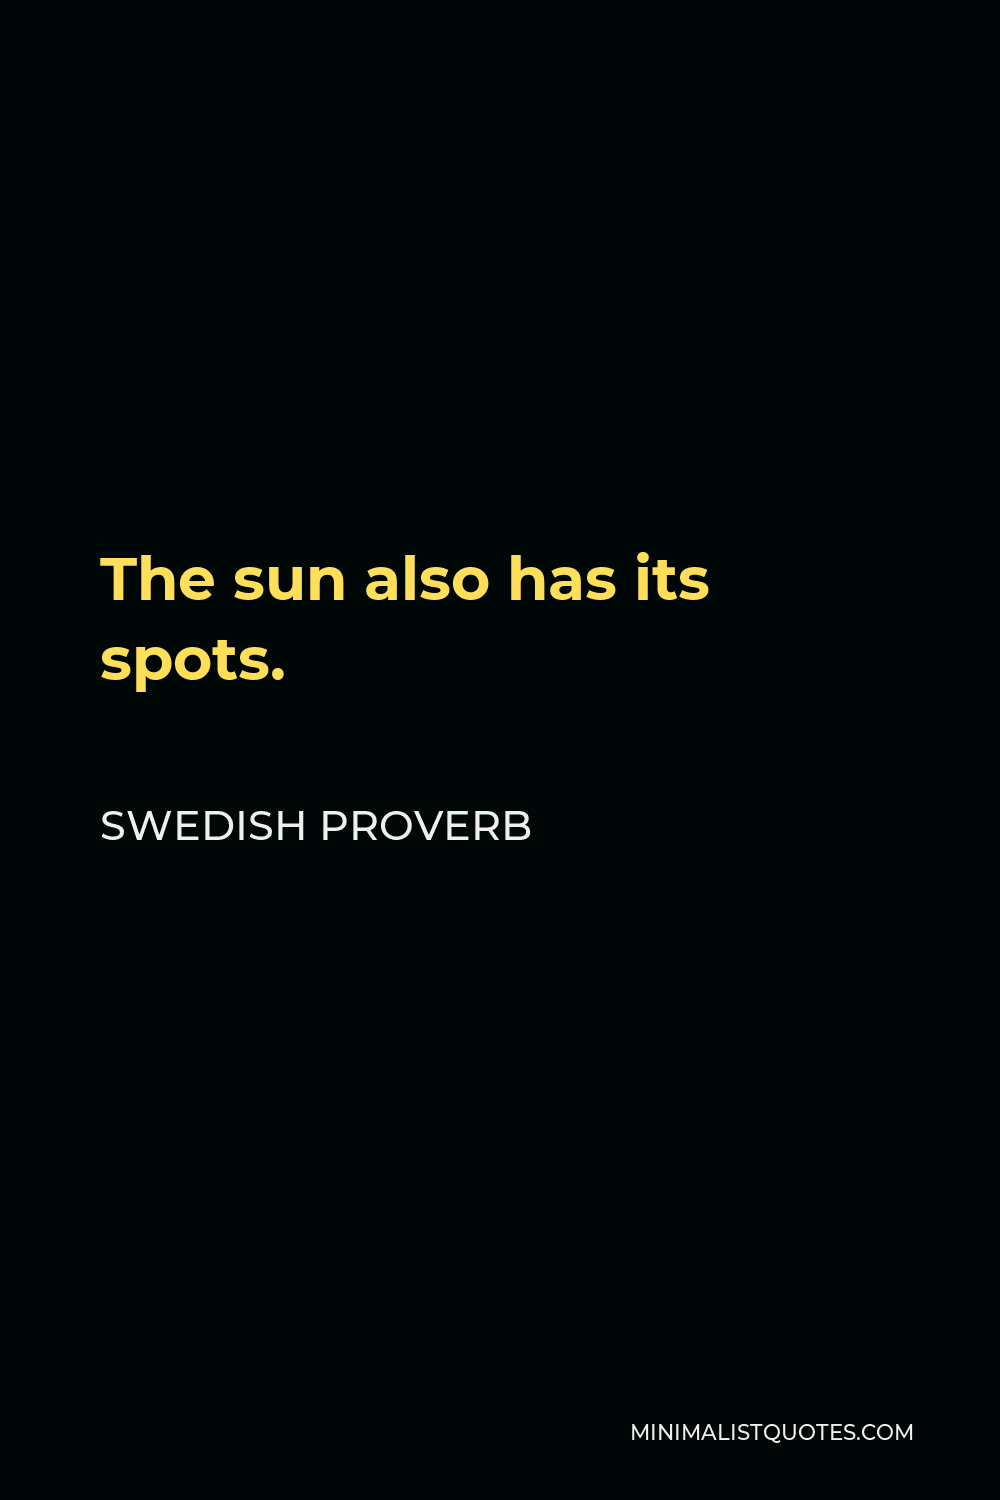 Swedish Proverb Quote - The sun also has its spots.